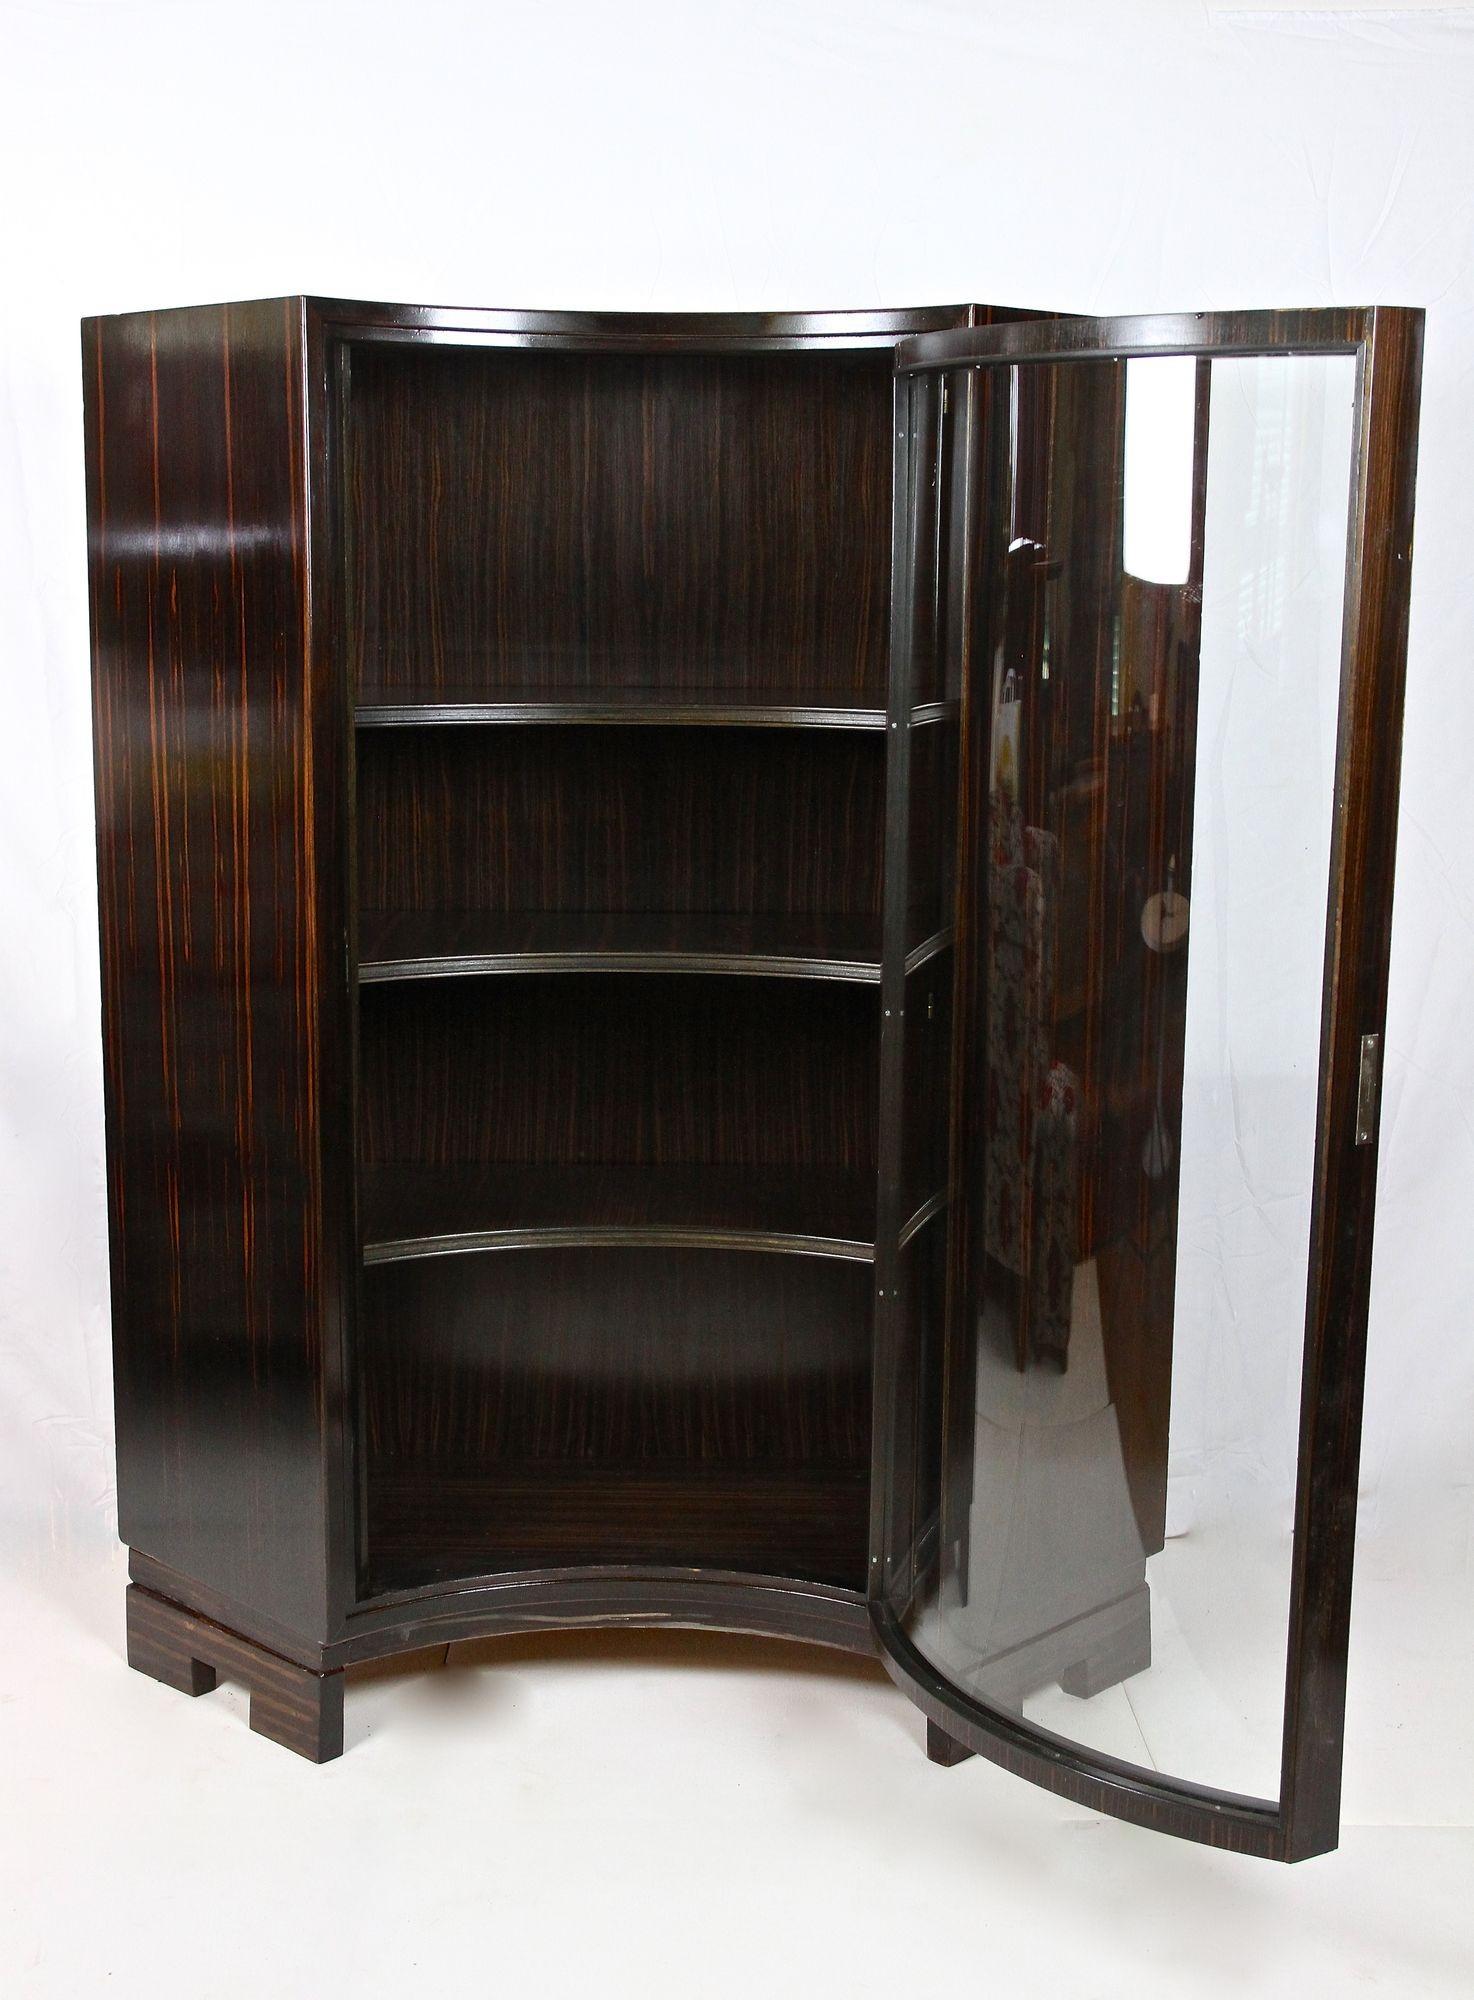 Stunning Art Deco palisander display cabinet or corner cabinet from the famous period in France around 1930. This absolutely amazing Art Deco vitrine cabinet impresses with its extraordinary curved design. Due its smart construction it can be used